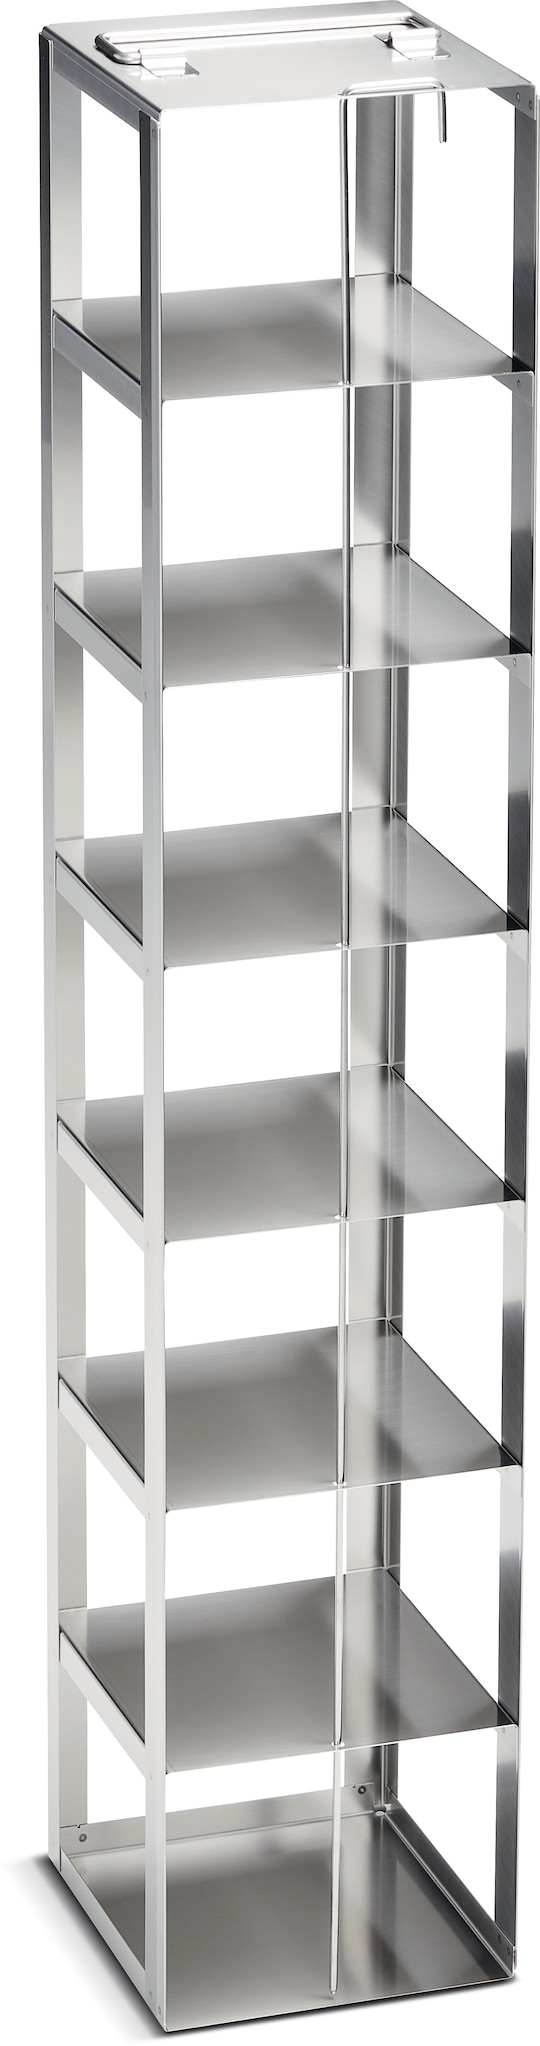 Metal tower rack for (4.0 in/ 102 mm) storage boxes in Eppendorf ULT chest freezer - (6001000411)